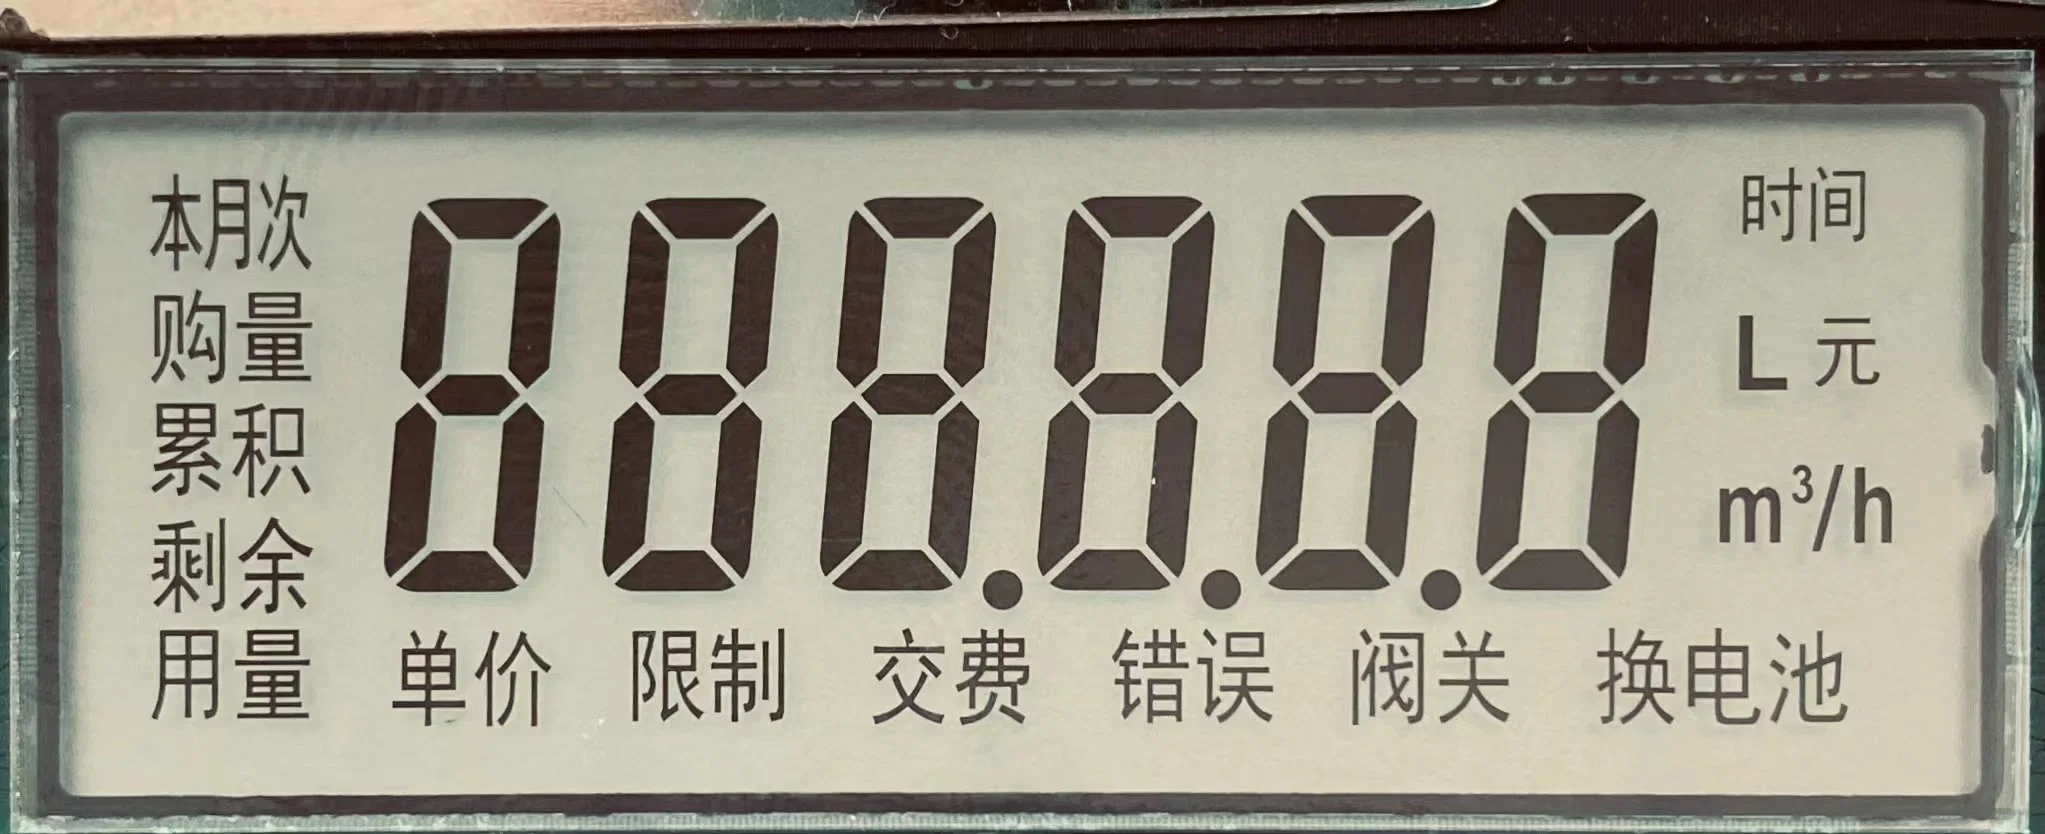 LCD Display for Water Electricity and Other Digital Meters